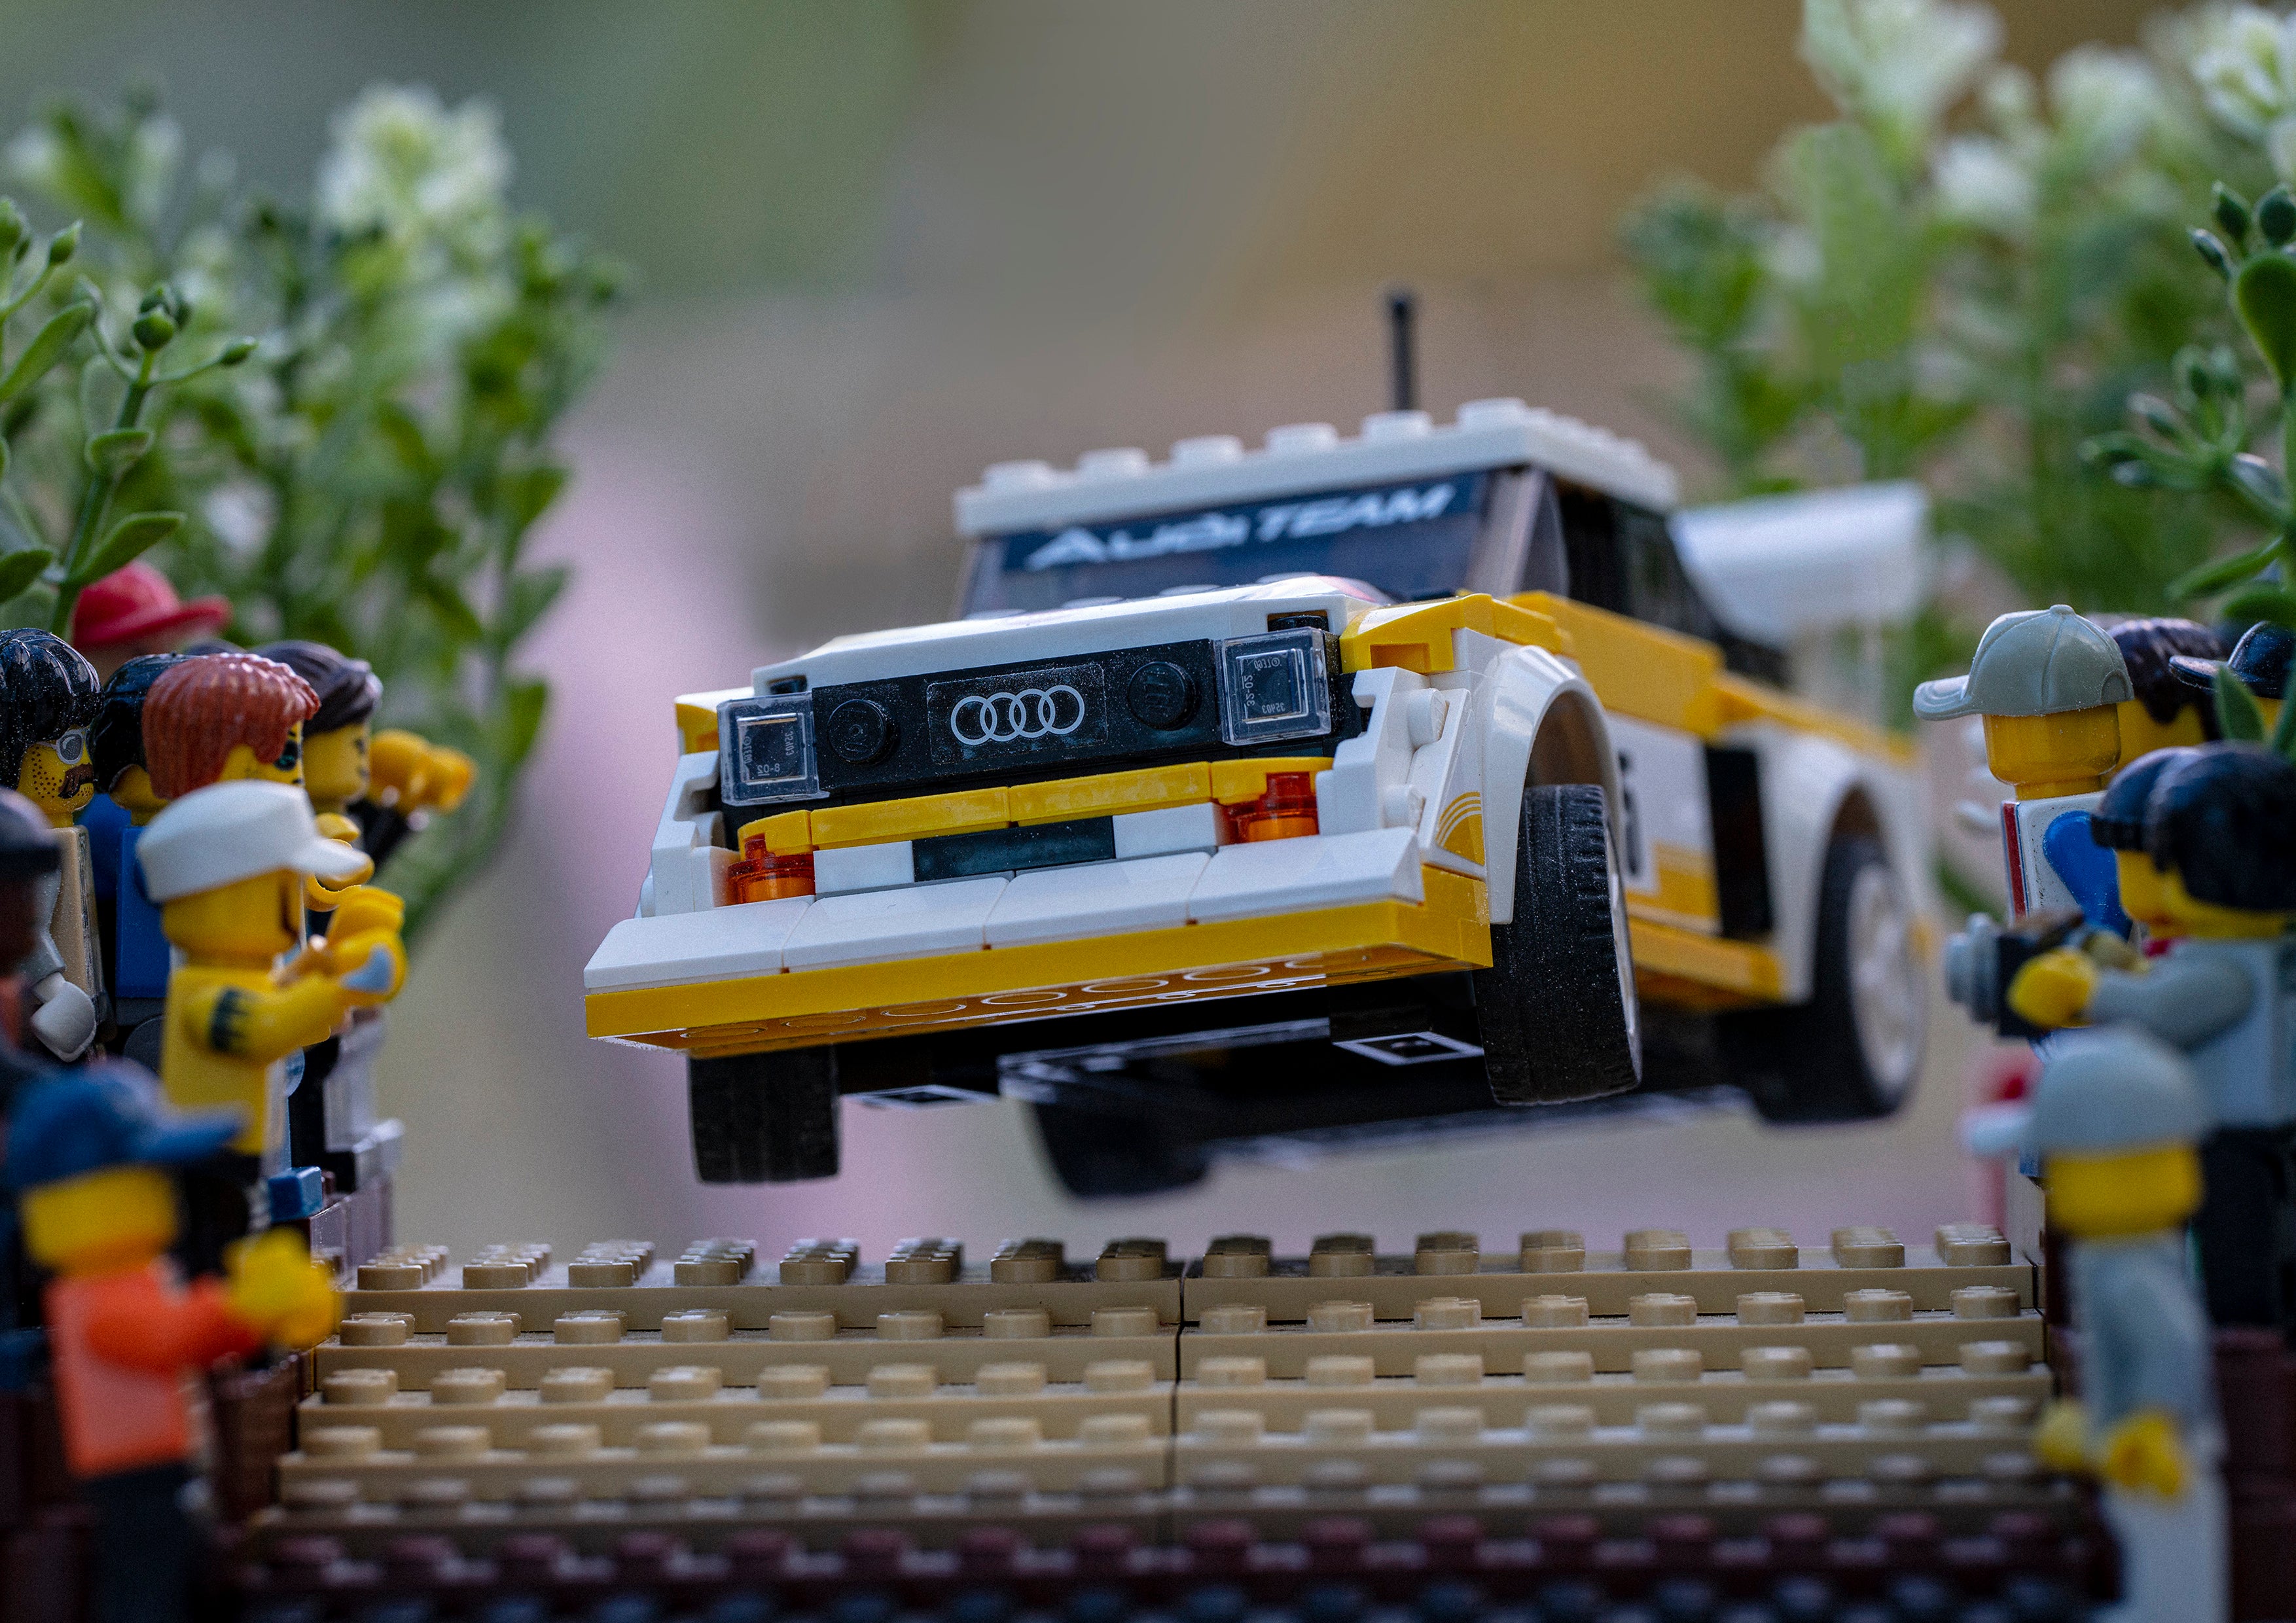 LEGO Audi Quattro S1 - The of Group B_001 – Fraser73